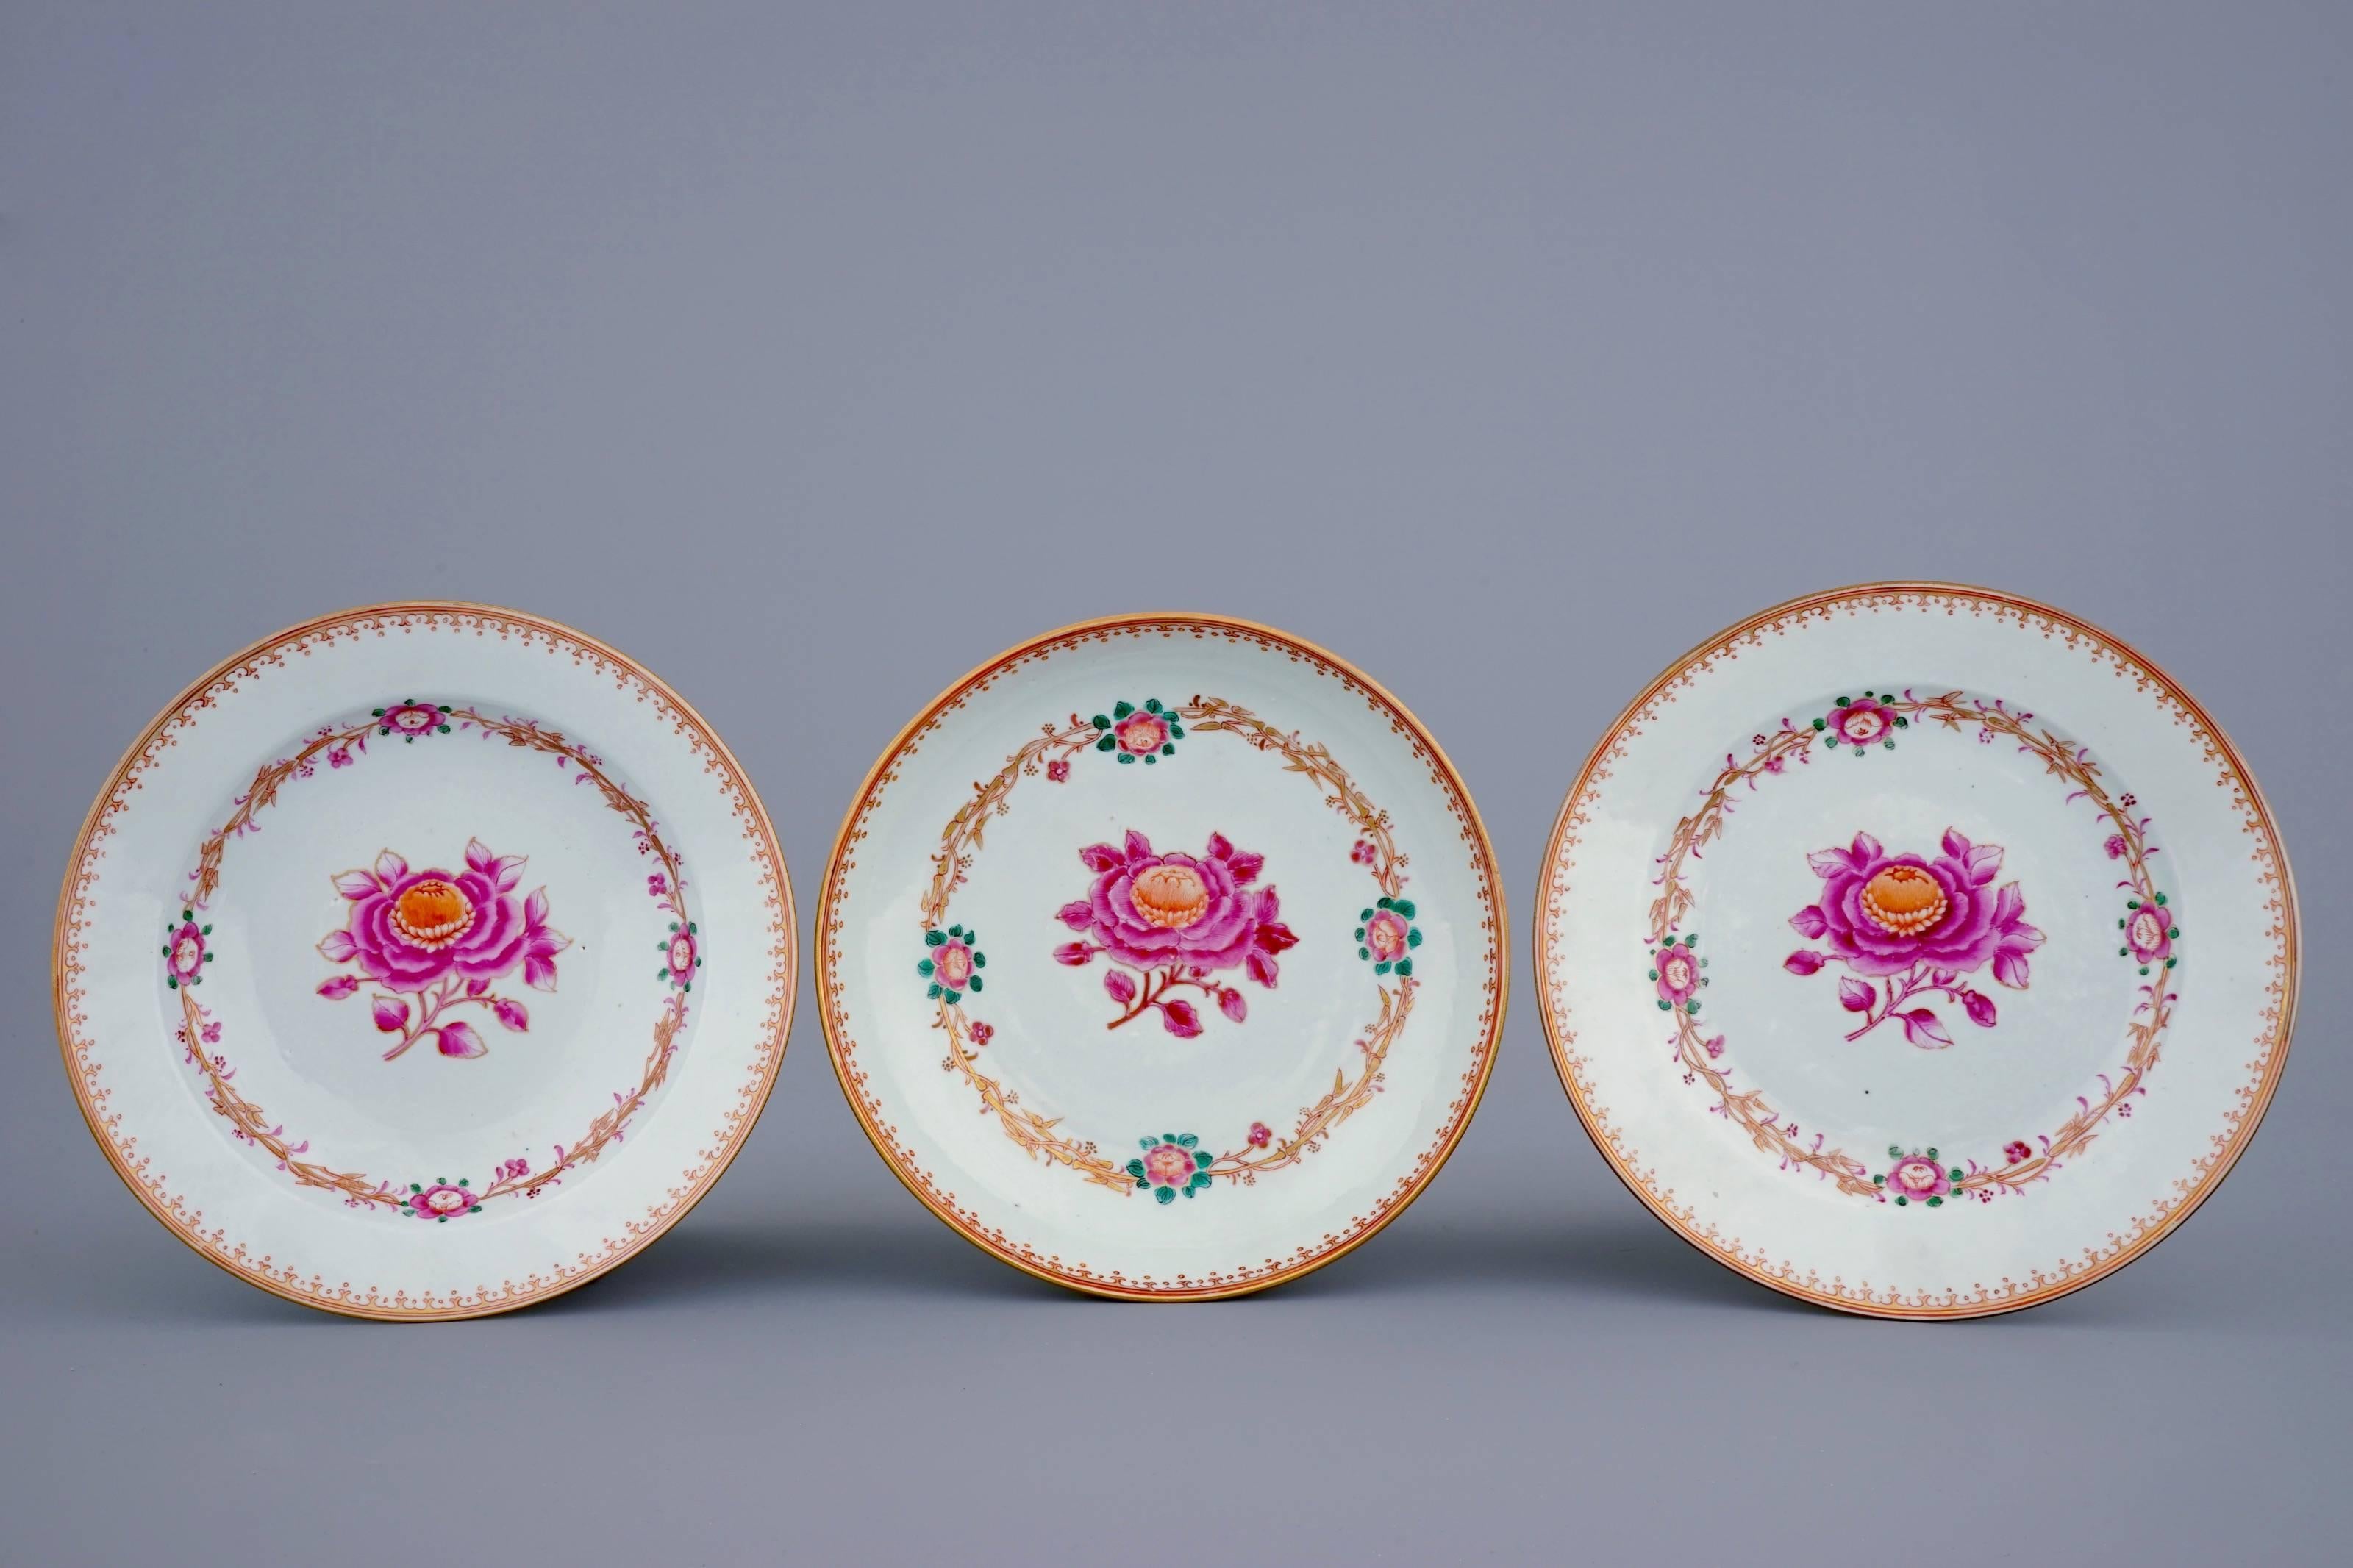 A part table service in Chinese export porcelain, circa 1765-1770, from the “John Adams service” (similar to the service ordered by the future second President of the United States). Comprising 37 pieces: One large dish, one octagonal dish, four